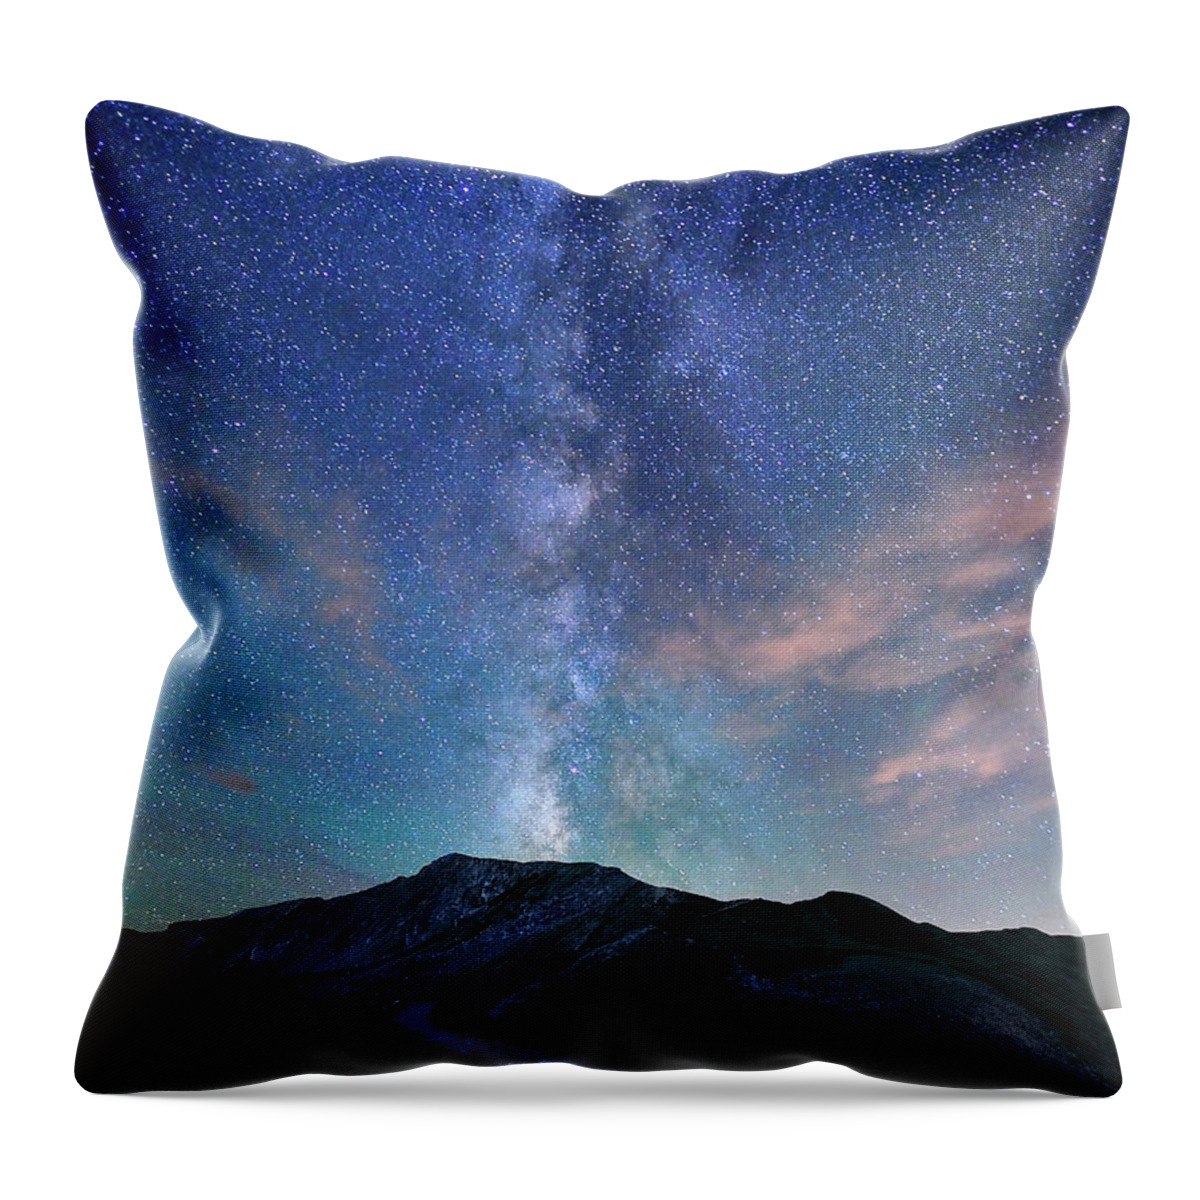 Tranquility Throw Pillow featuring the photograph Trail To The Milky Way by Mengzhonghua Photography